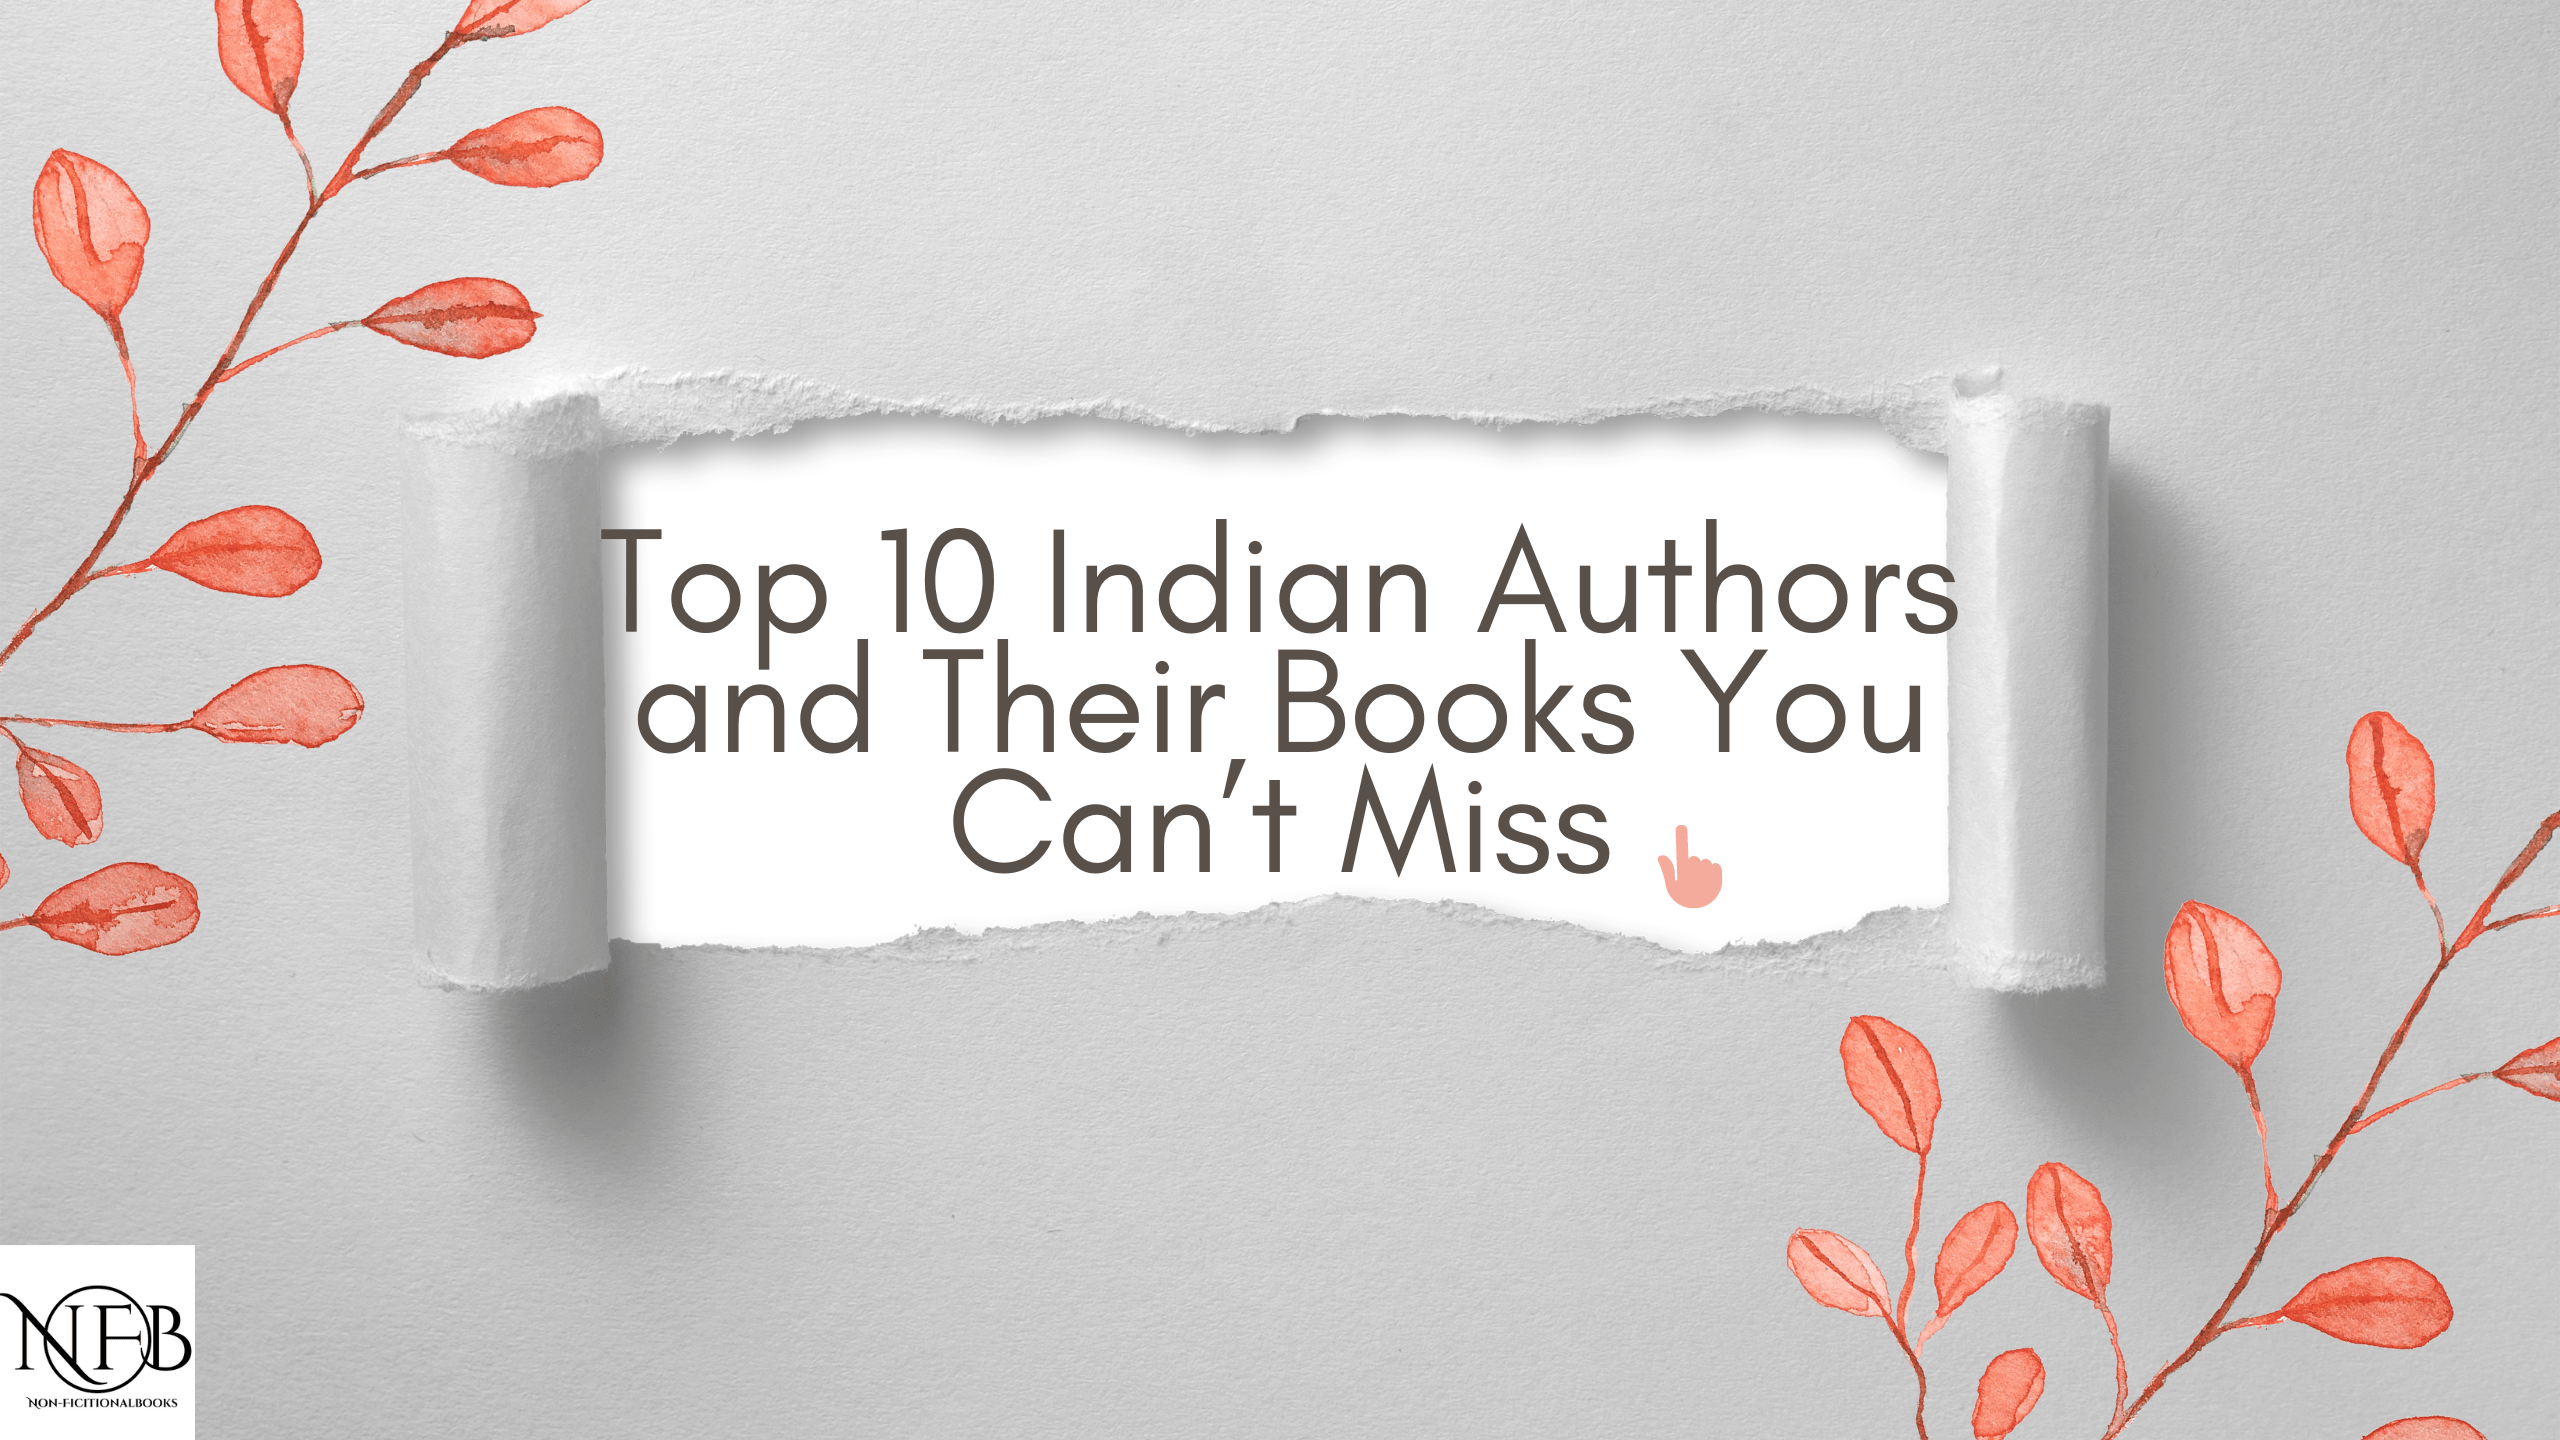 Top 10 Indian Authors and Their Books You Can’t-Miss